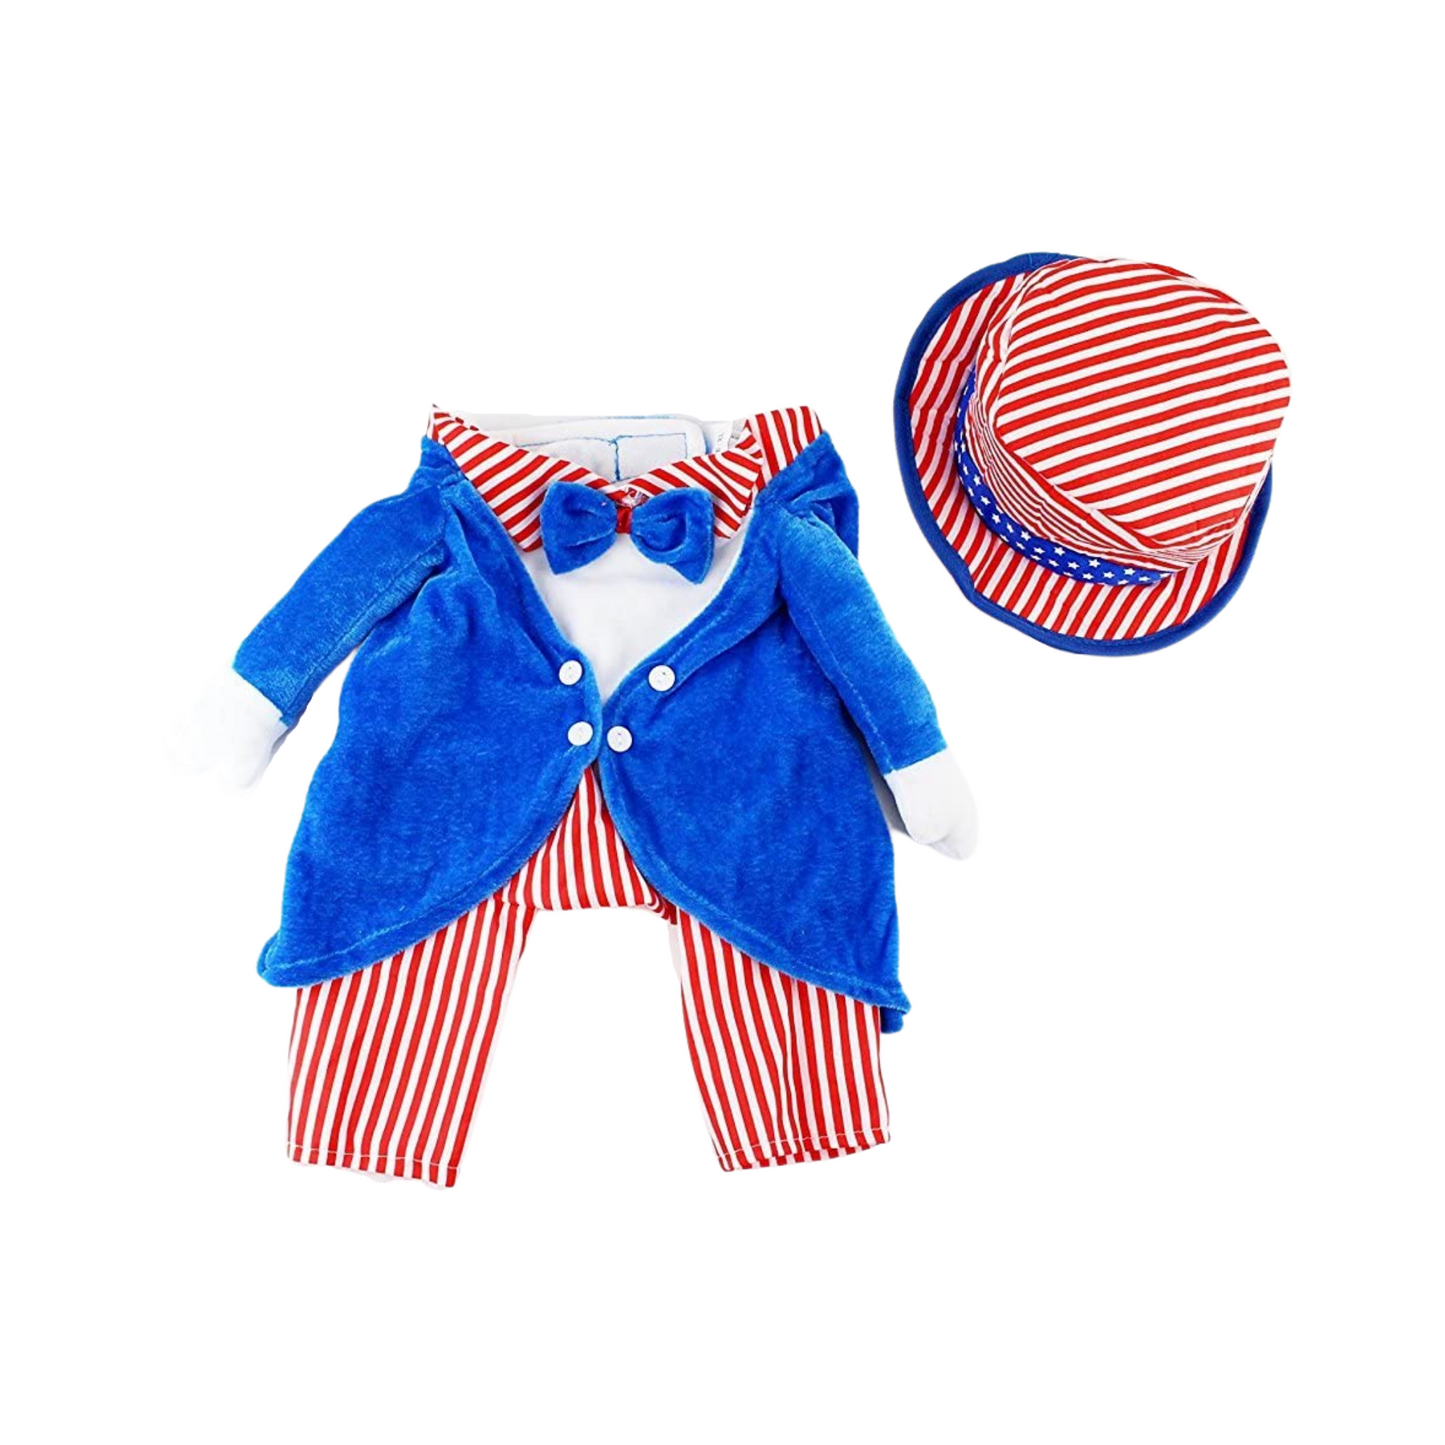 Midlee Uncle Sam 4th of July Fake Arms Dog Costume